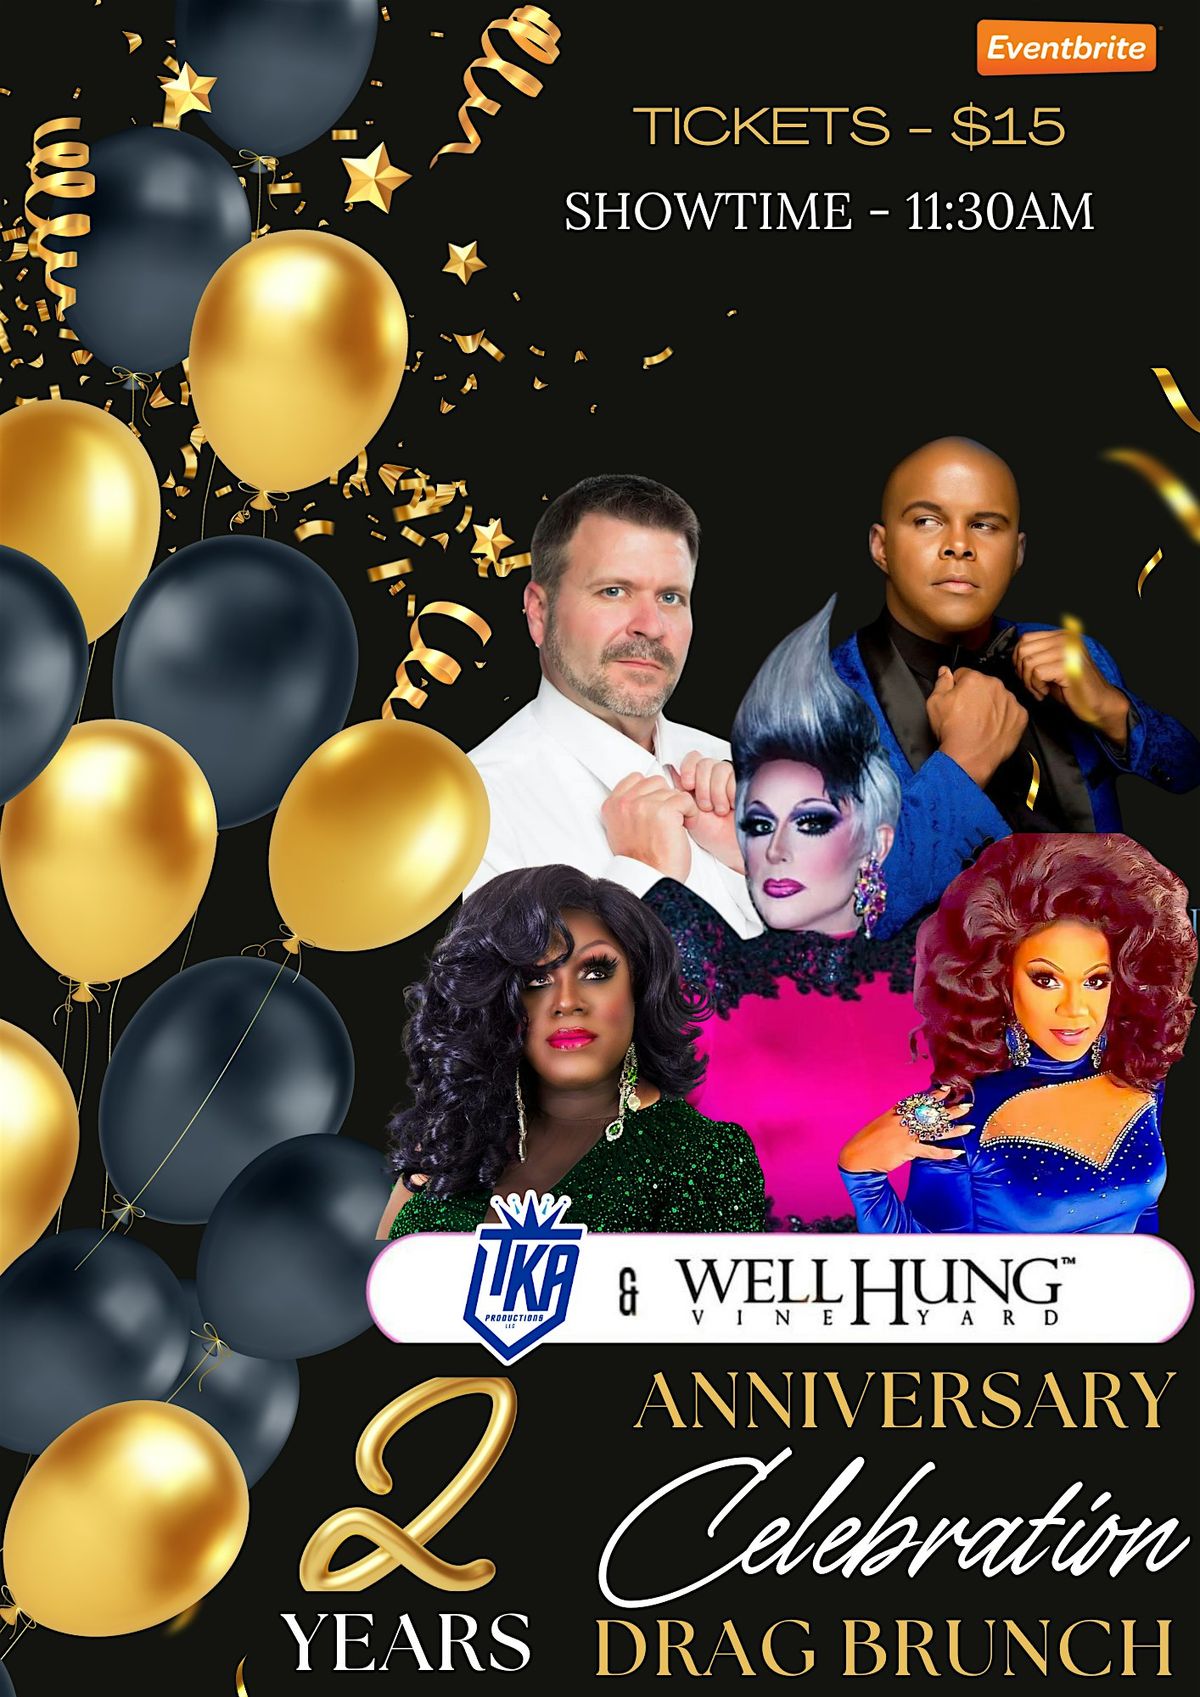 Well Hung Vineyards 2yr Anniversary Drag Brunch Party